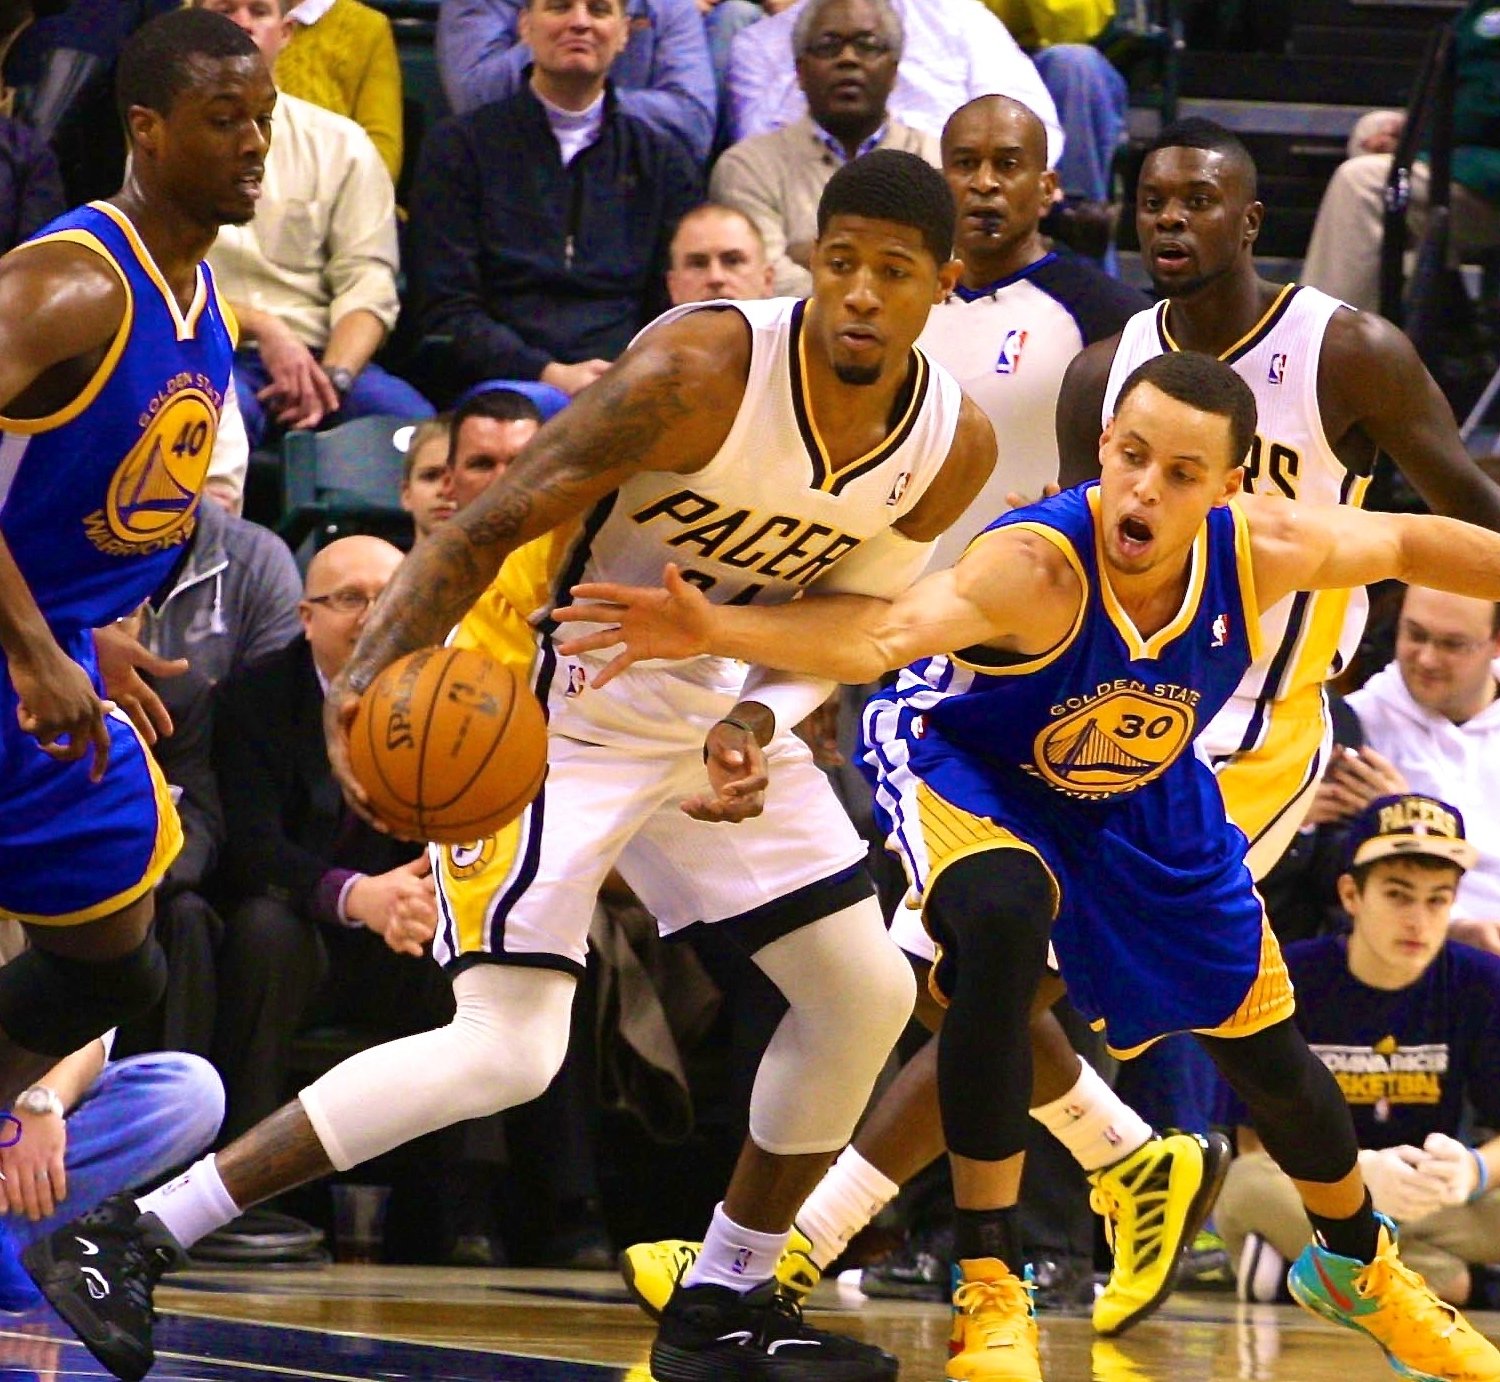 Golden State Warriors vs. Indiana Pacers Live Score and Analysis